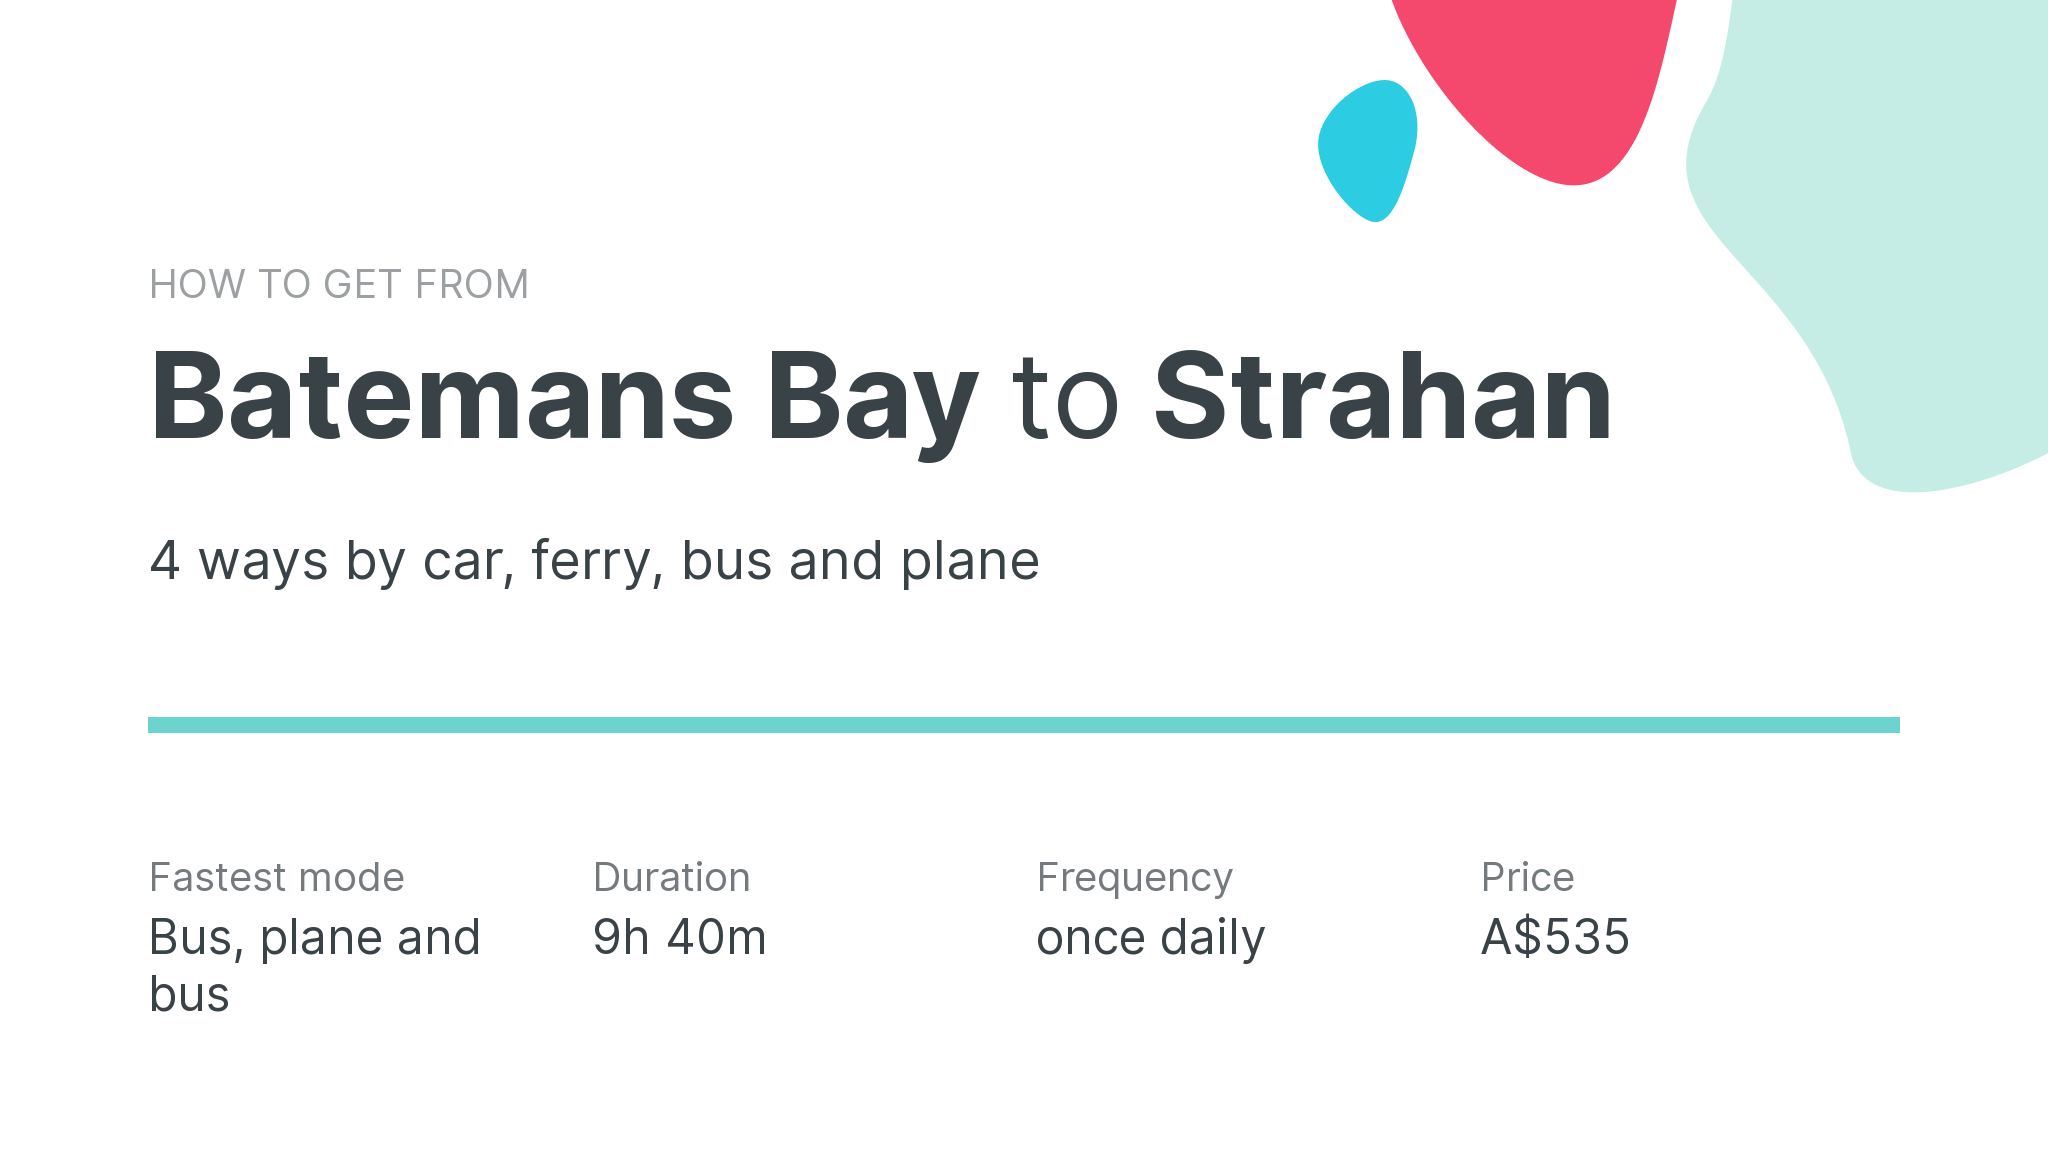 How do I get from Batemans Bay to Strahan